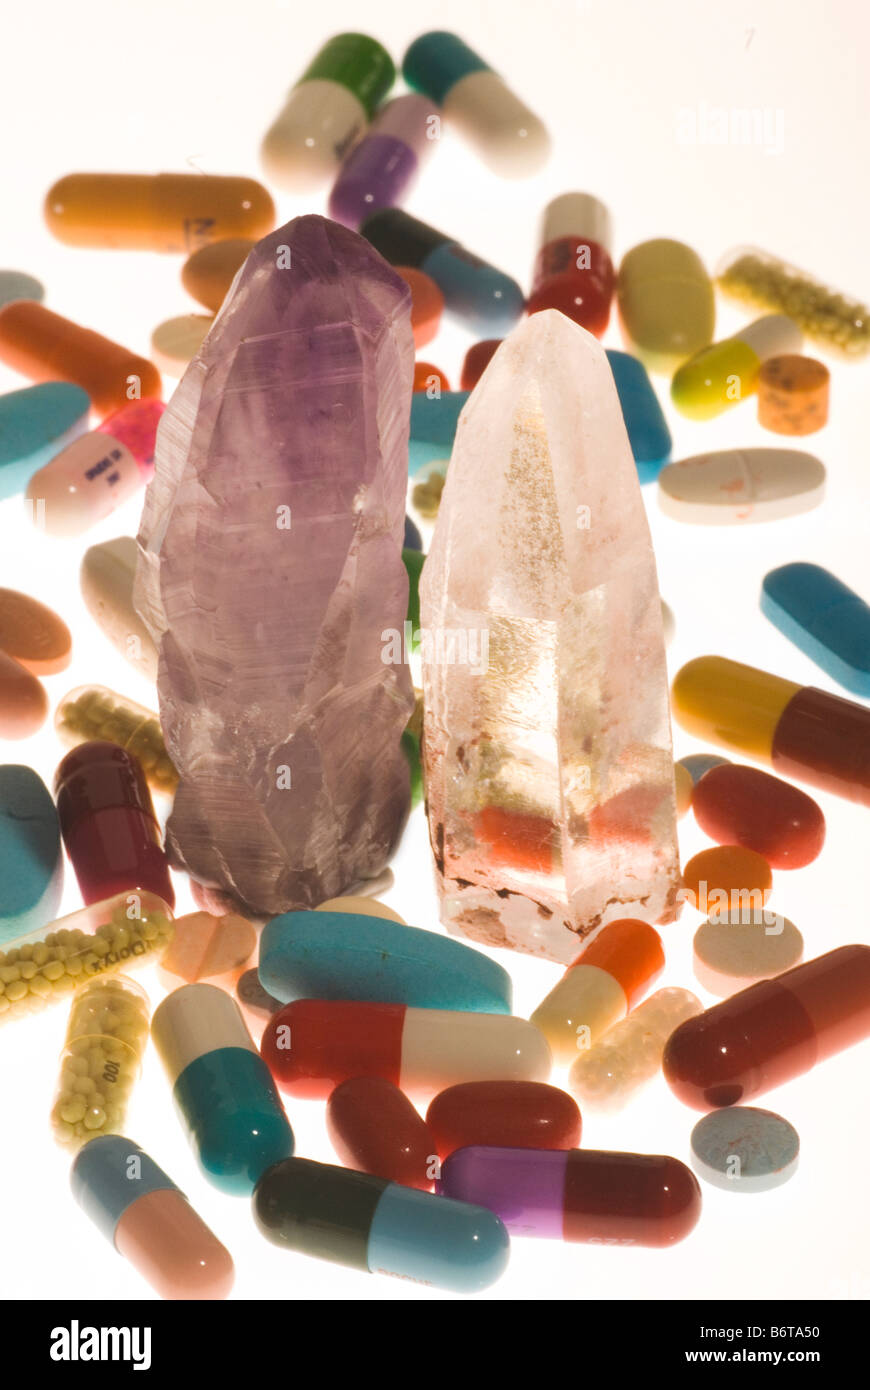 Drugs and crystals Stock Photo